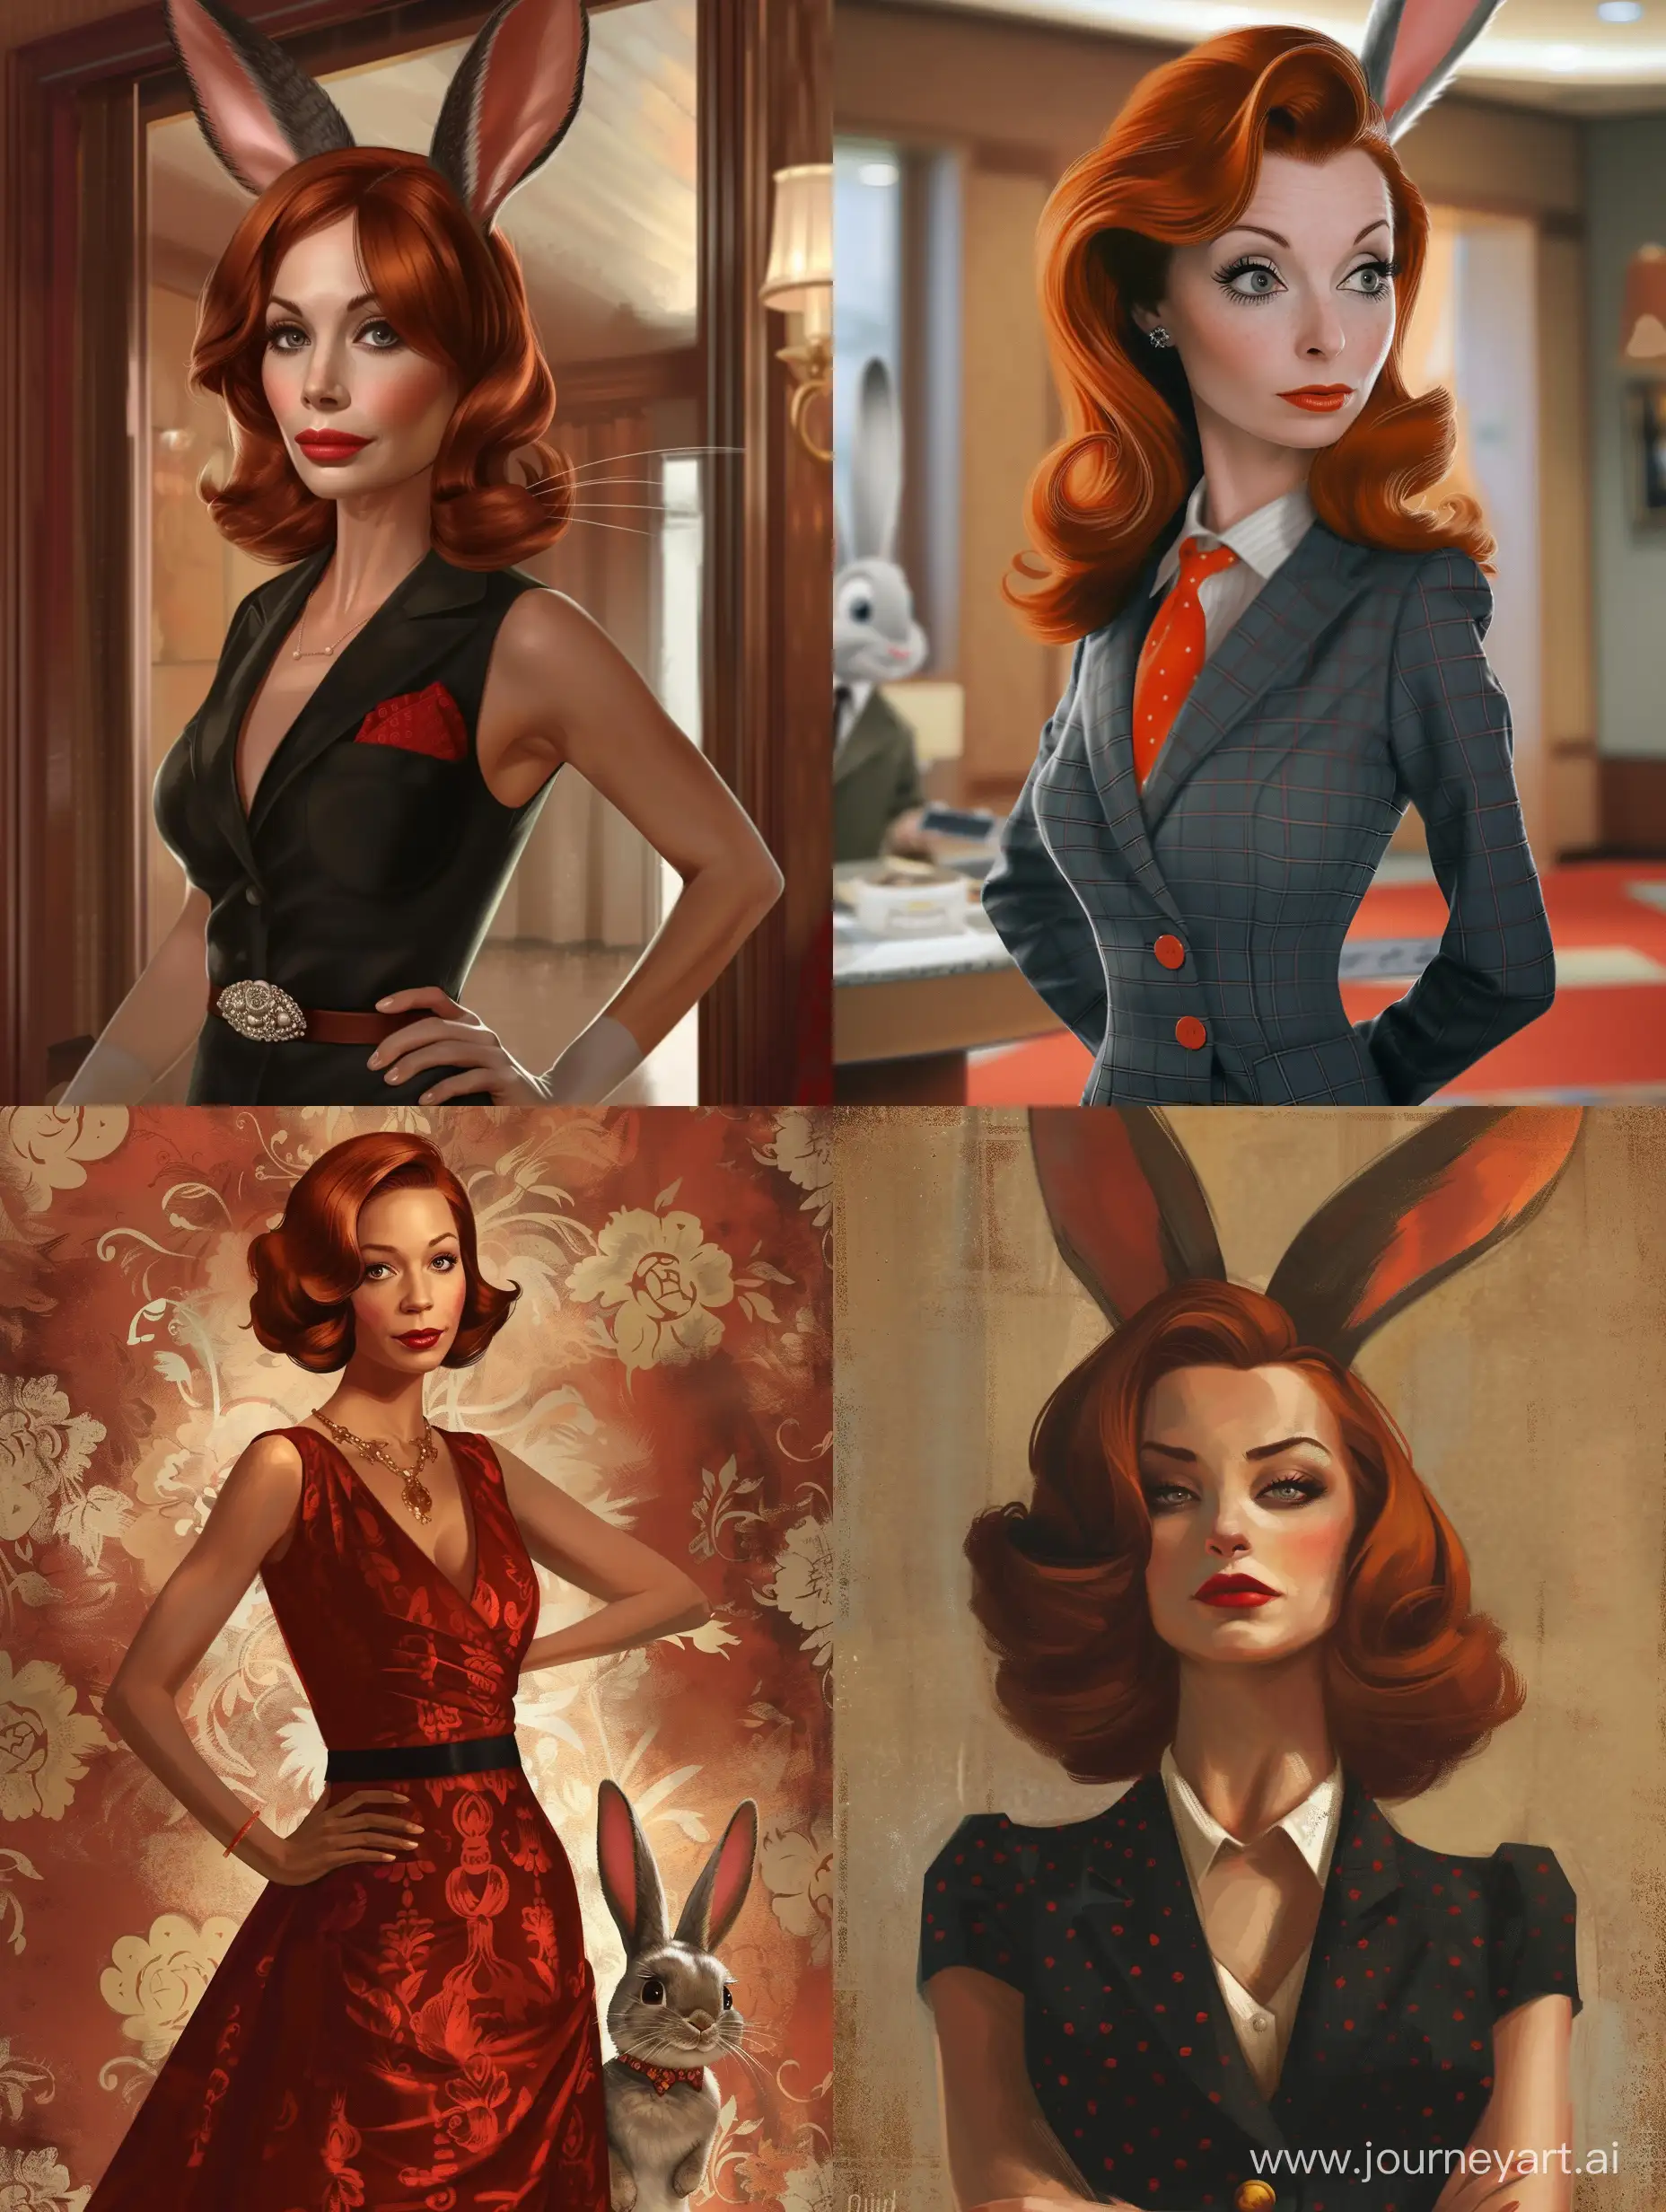 Sultry-Joan-from-Mad-Men-Redesigned-in-the-Glamorous-Style-of-Jessica-Rabbit